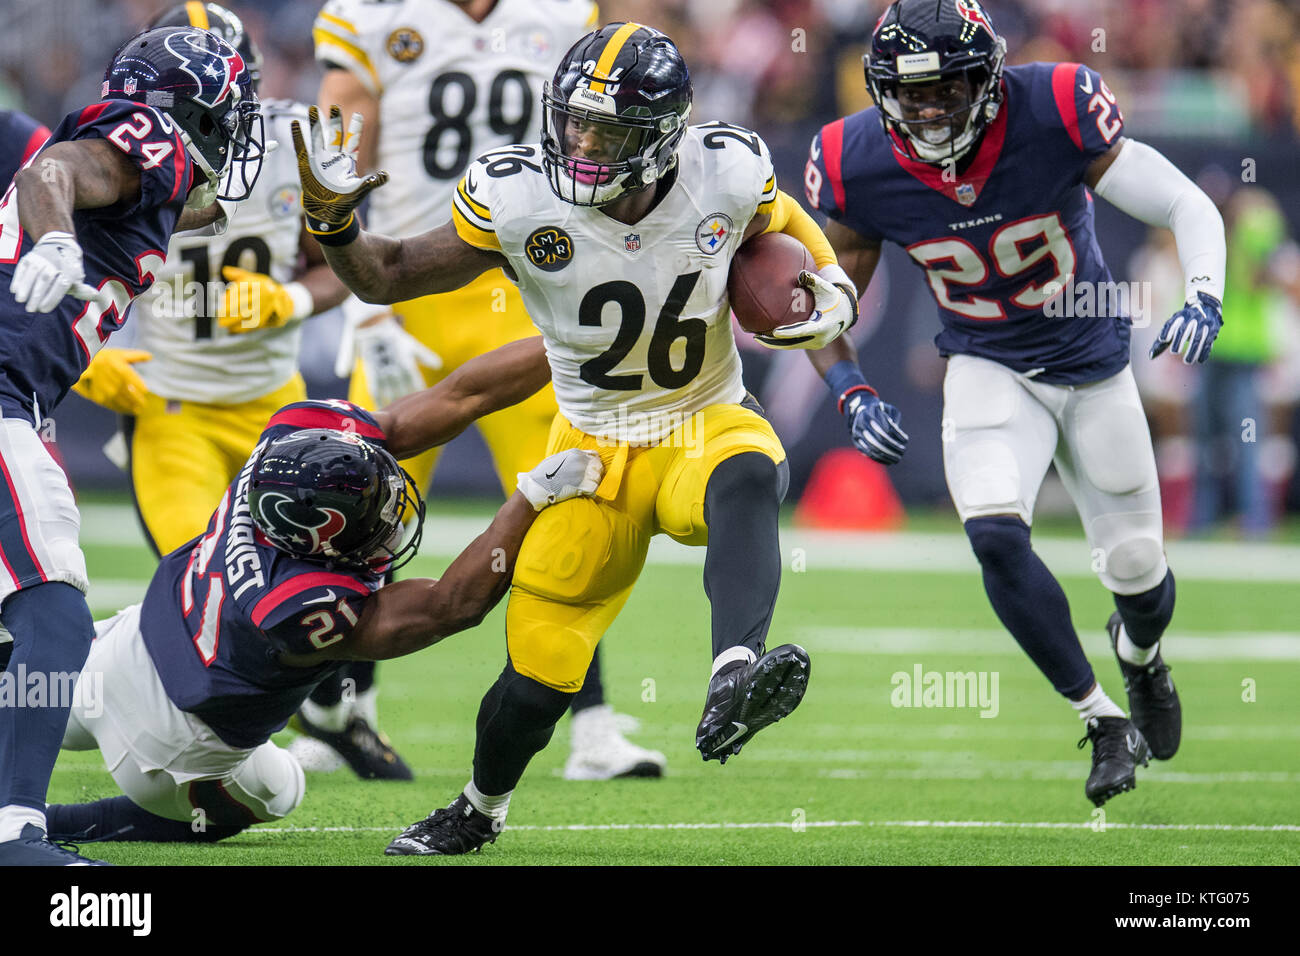 Houston, TX, USA. 25th Dec, 2017. Pittsburgh Steelers running back Le'Veon Bell (26) carries the ball during the 1st quarter of an NFL football game between the Houston Texans and the Pittsburgh Steelers at NRG Stadium in Houston, TX. Trask Smith/CSM/Alamy Live News Stock Photo